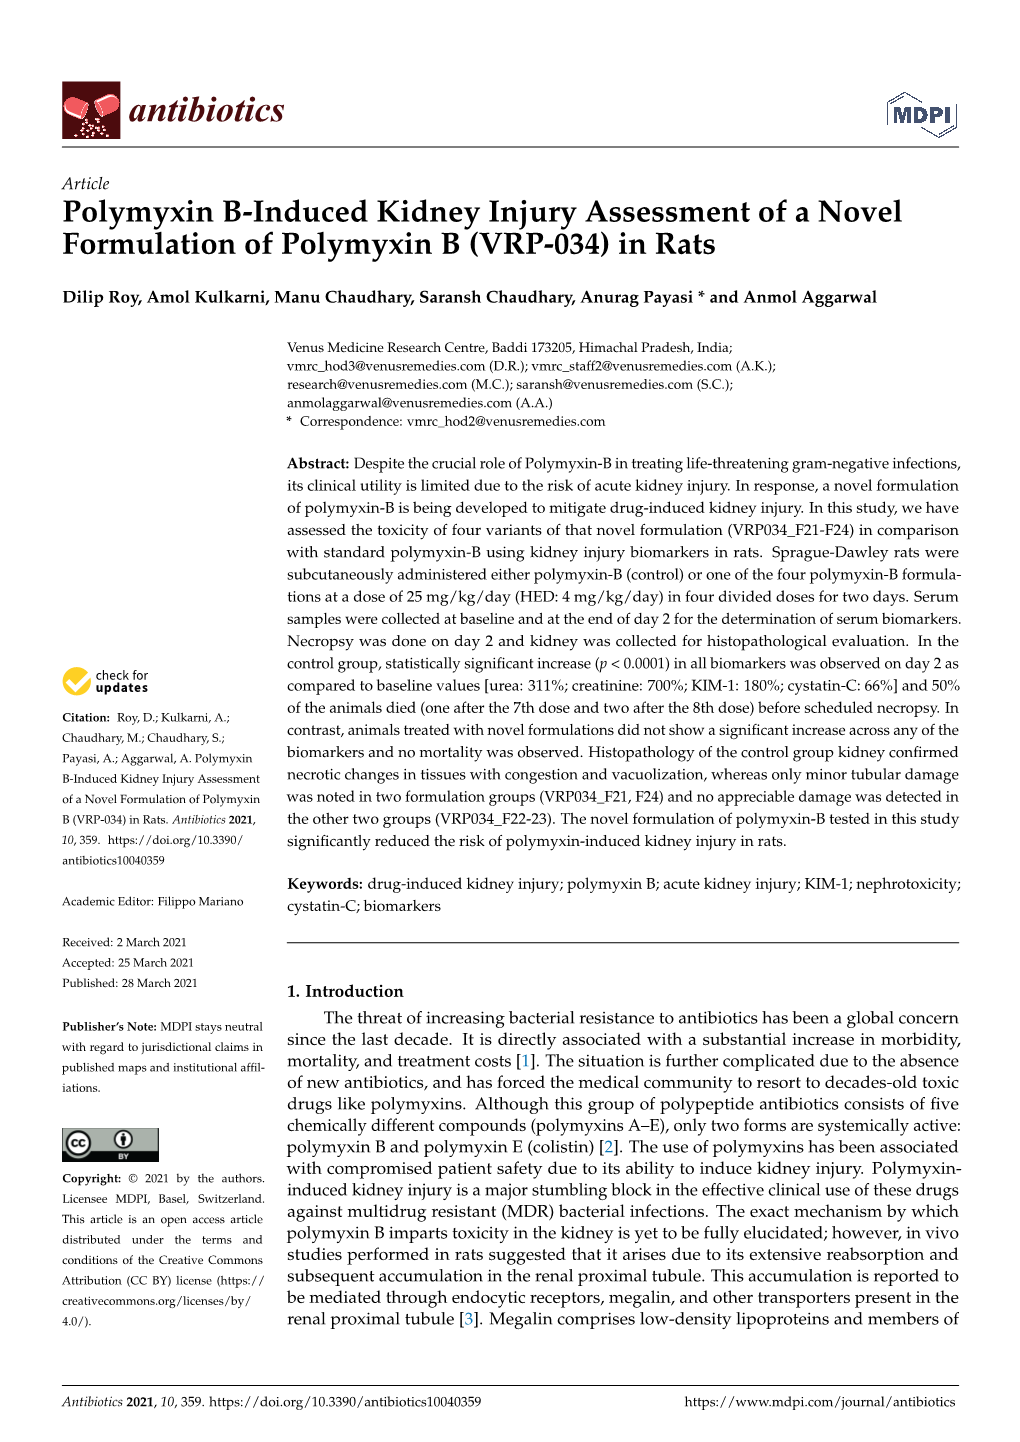 Polymyxin B-Induced Kidney Injury Assessment of a Novel Formulation of Polymyxin B (VRP-034) in Rats